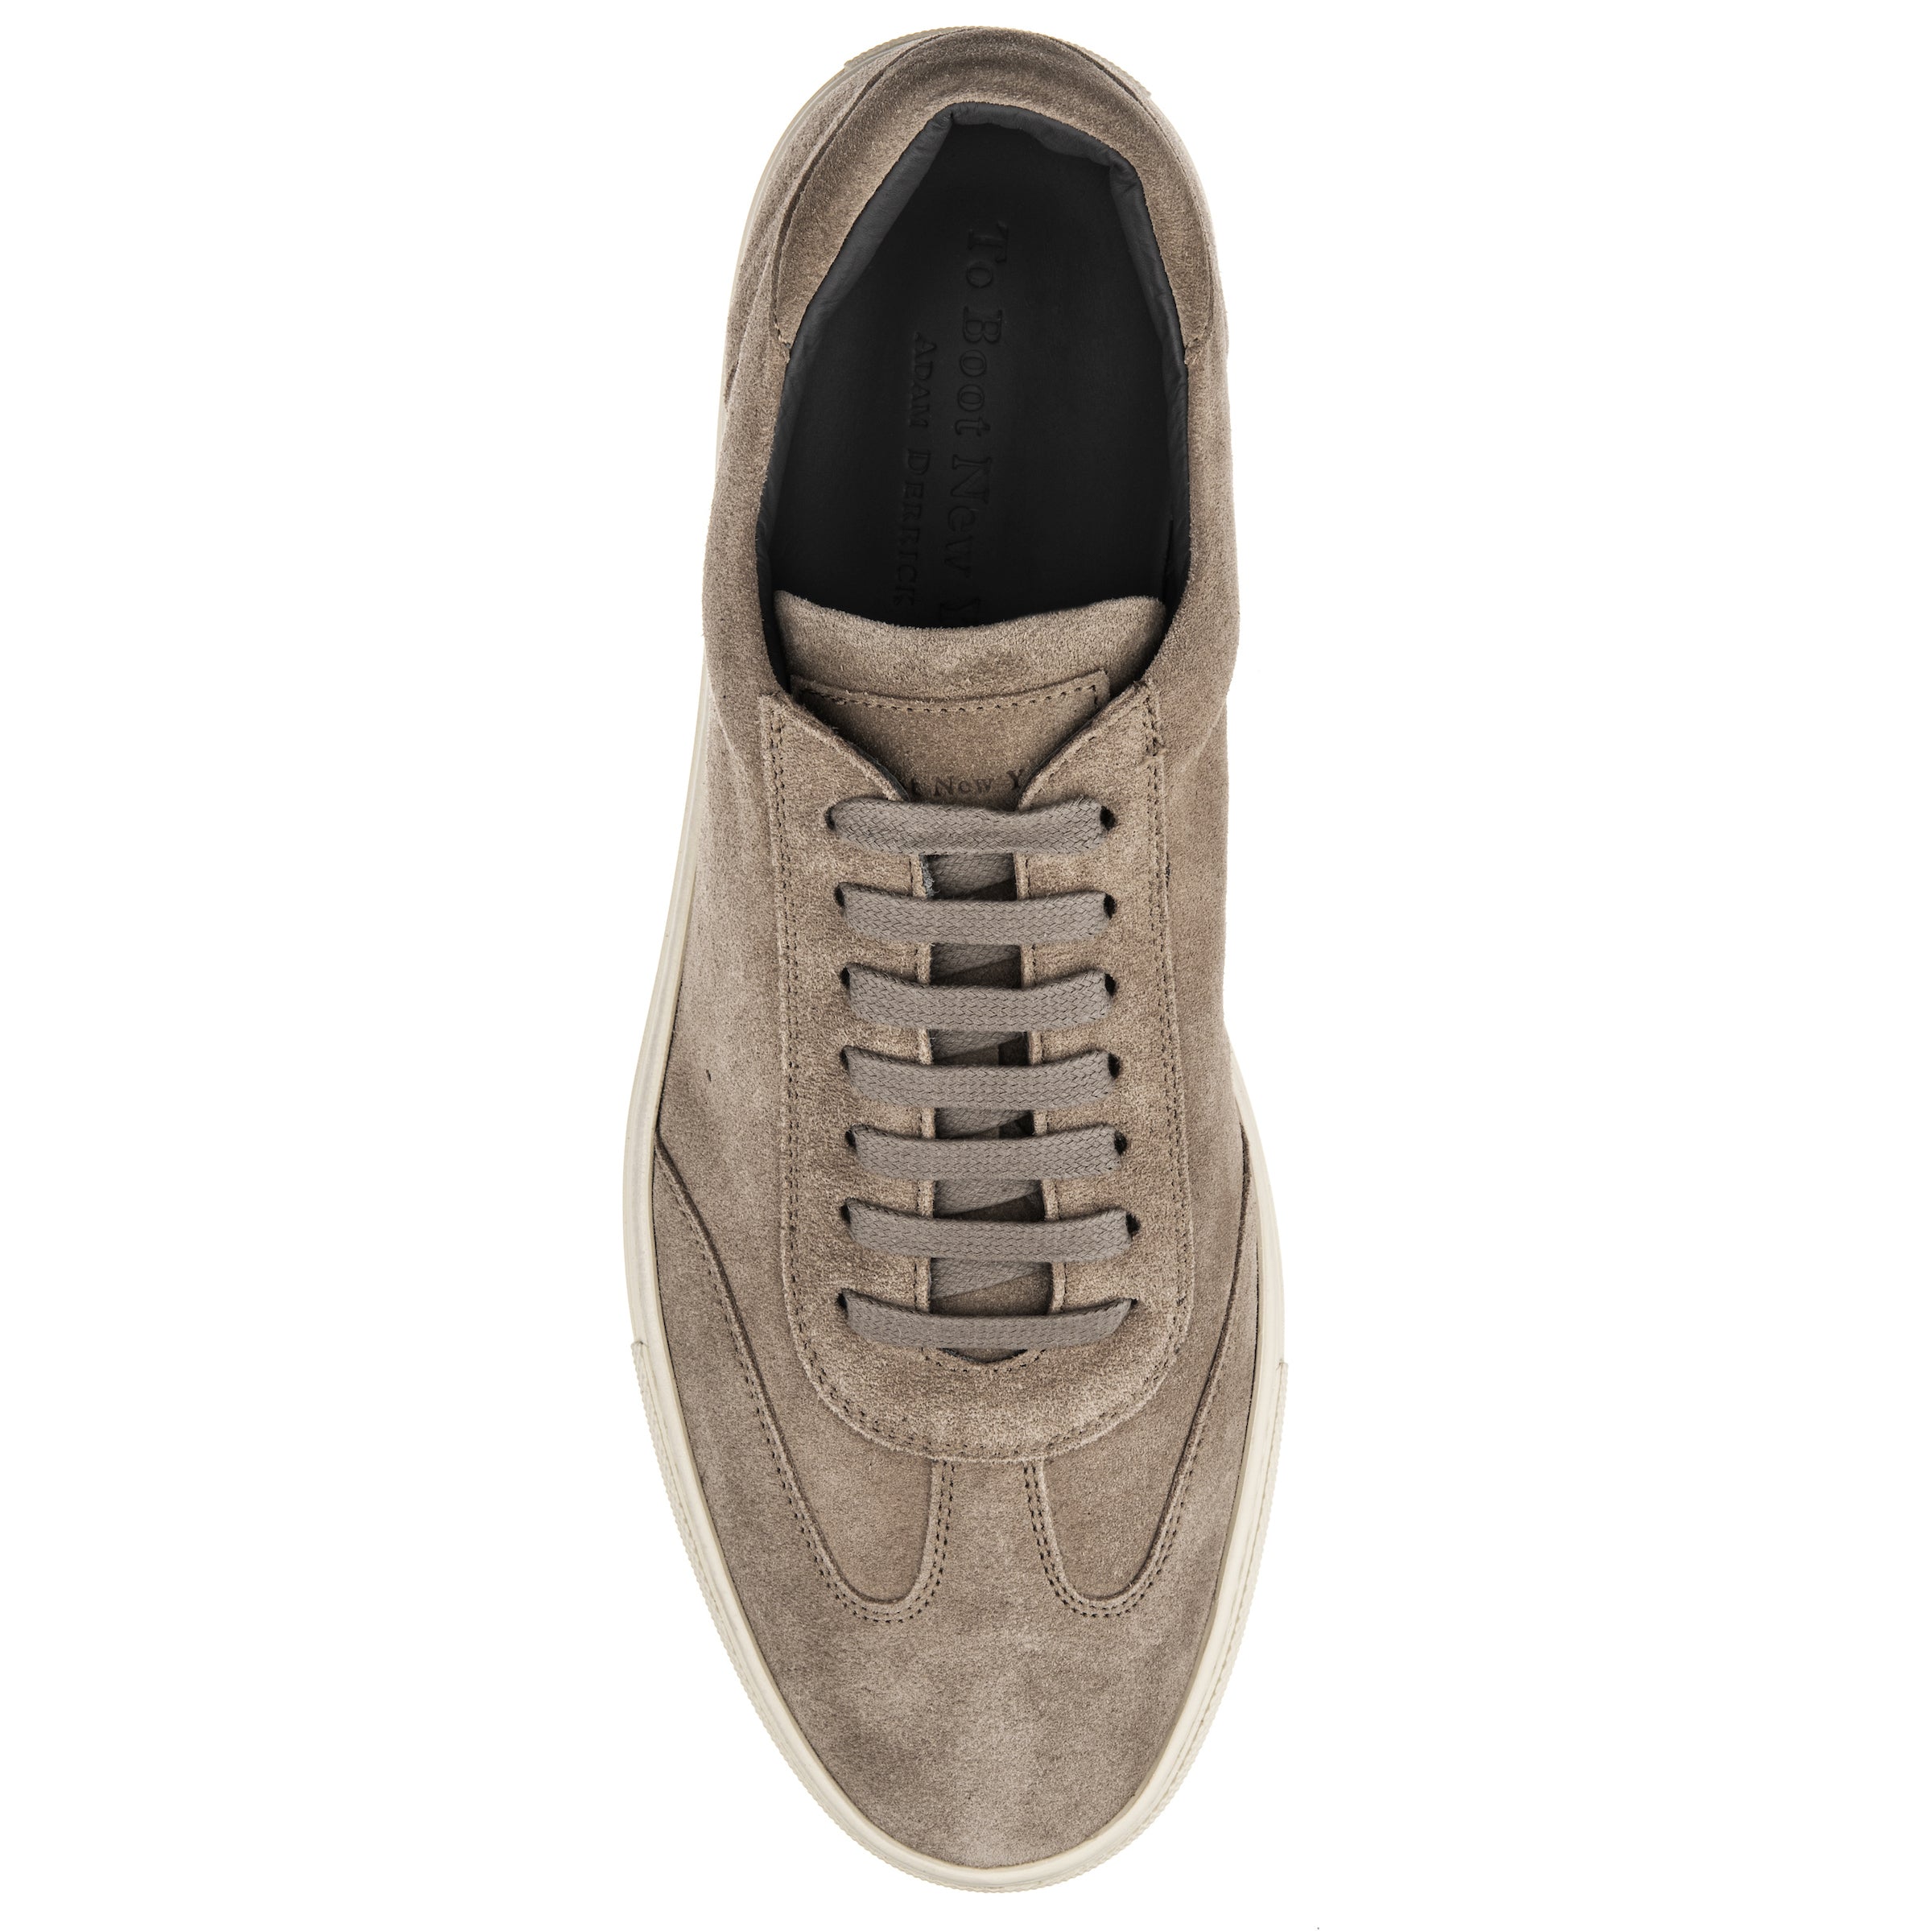 Matlock Taupe Suede Sneaker